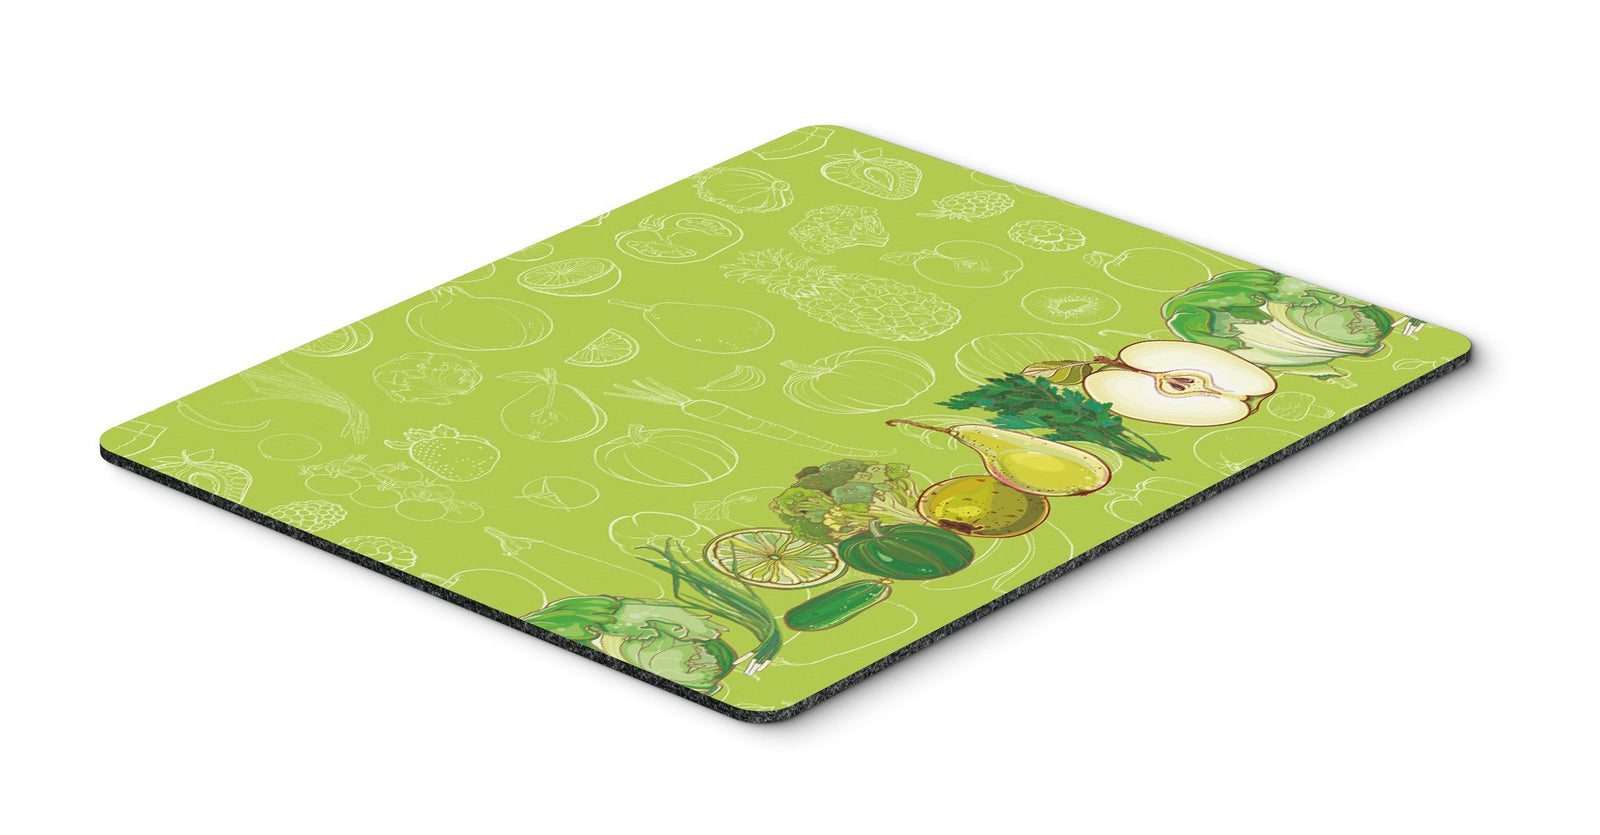 Fruits and Vegetables in Green Mouse Pad, Hot Pad or Trivet BB5135MP by Caroline's Treasures